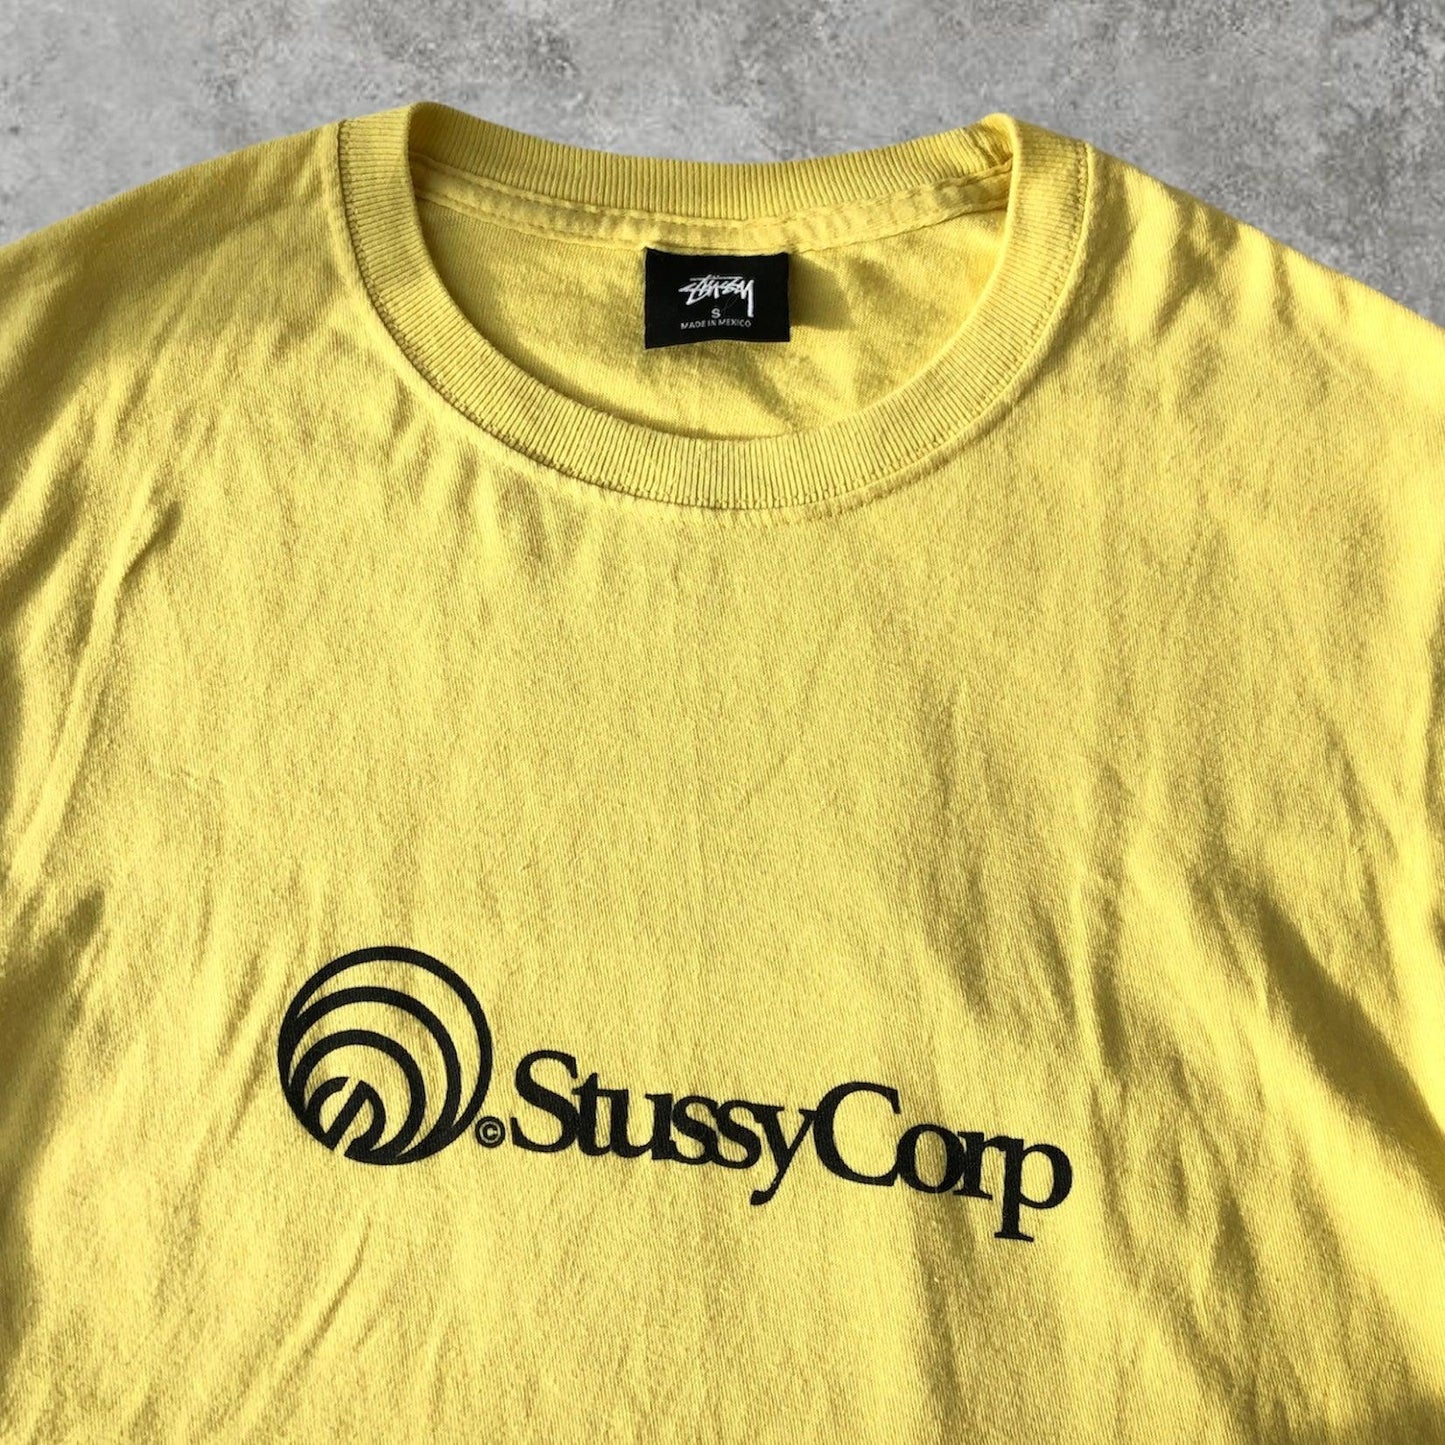 Stussy Tee - Known Source